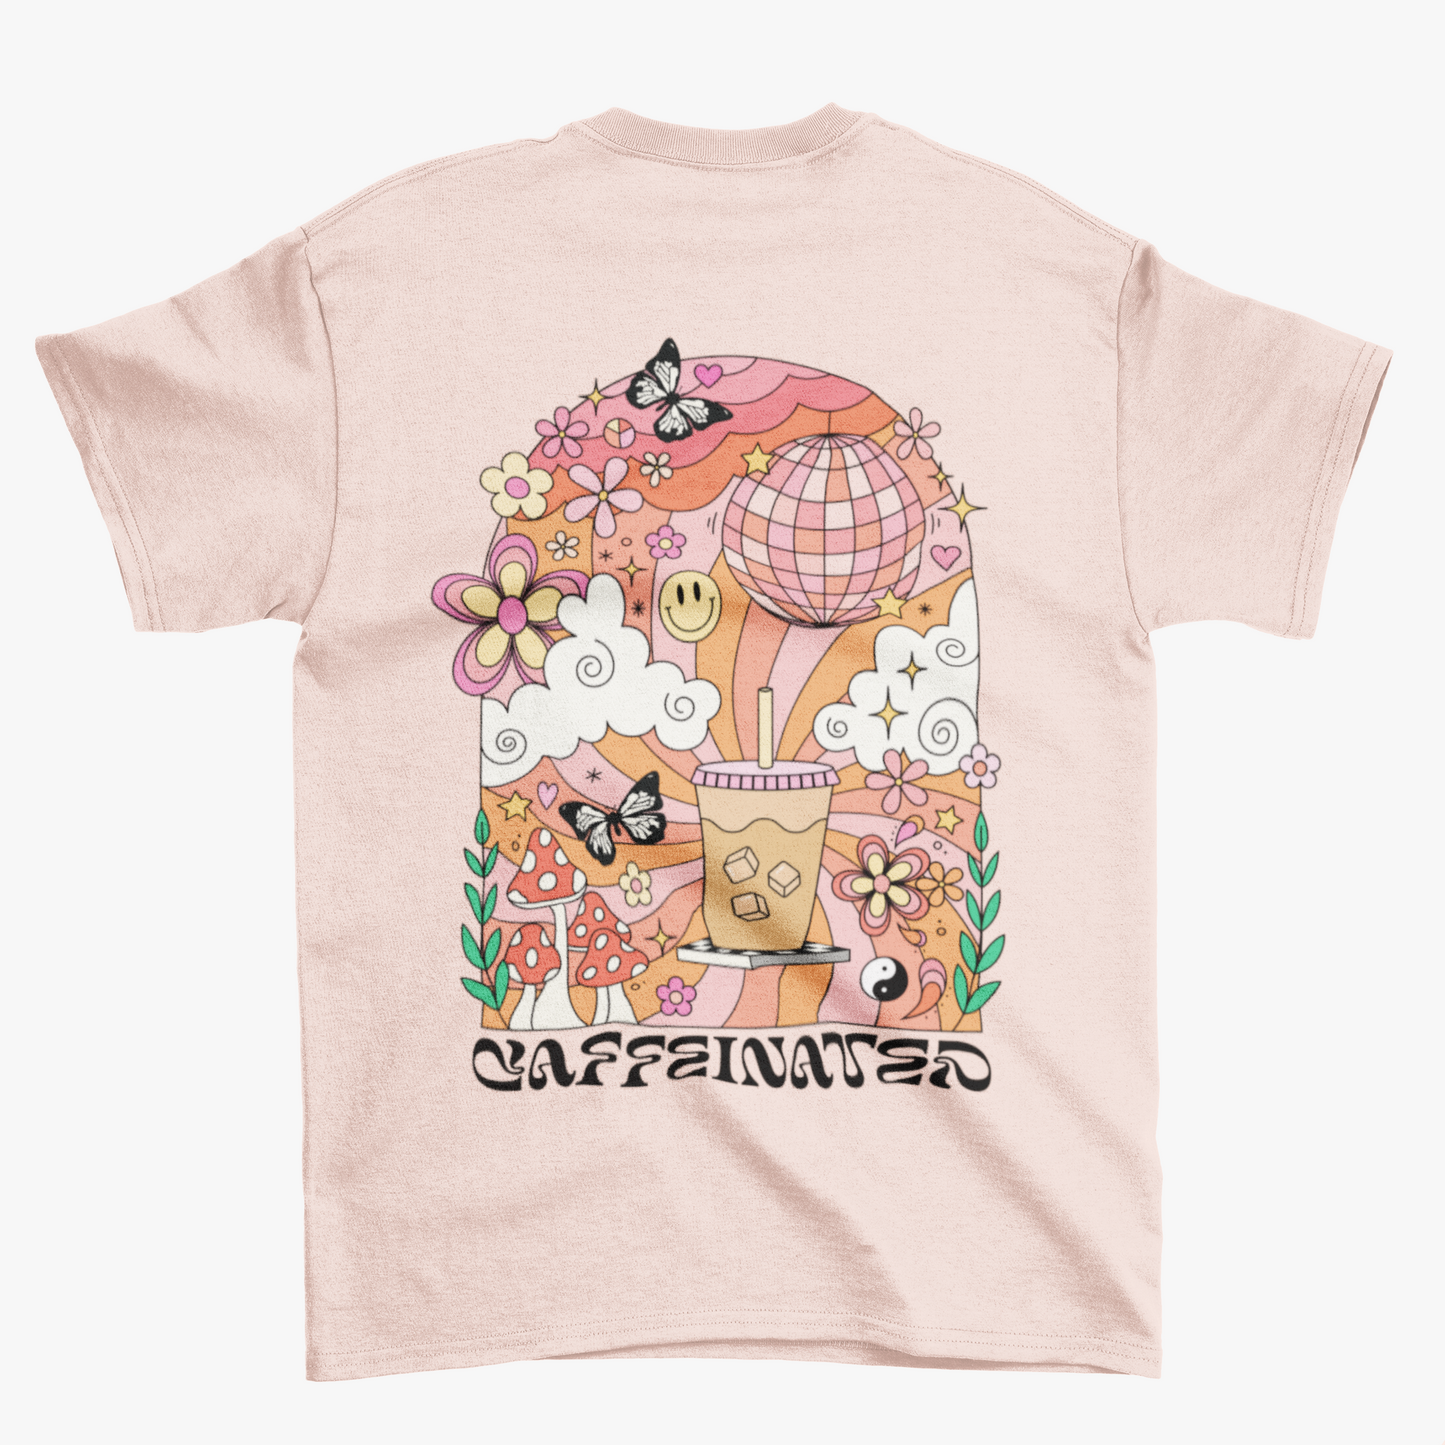 Caffeinated Graphic Top